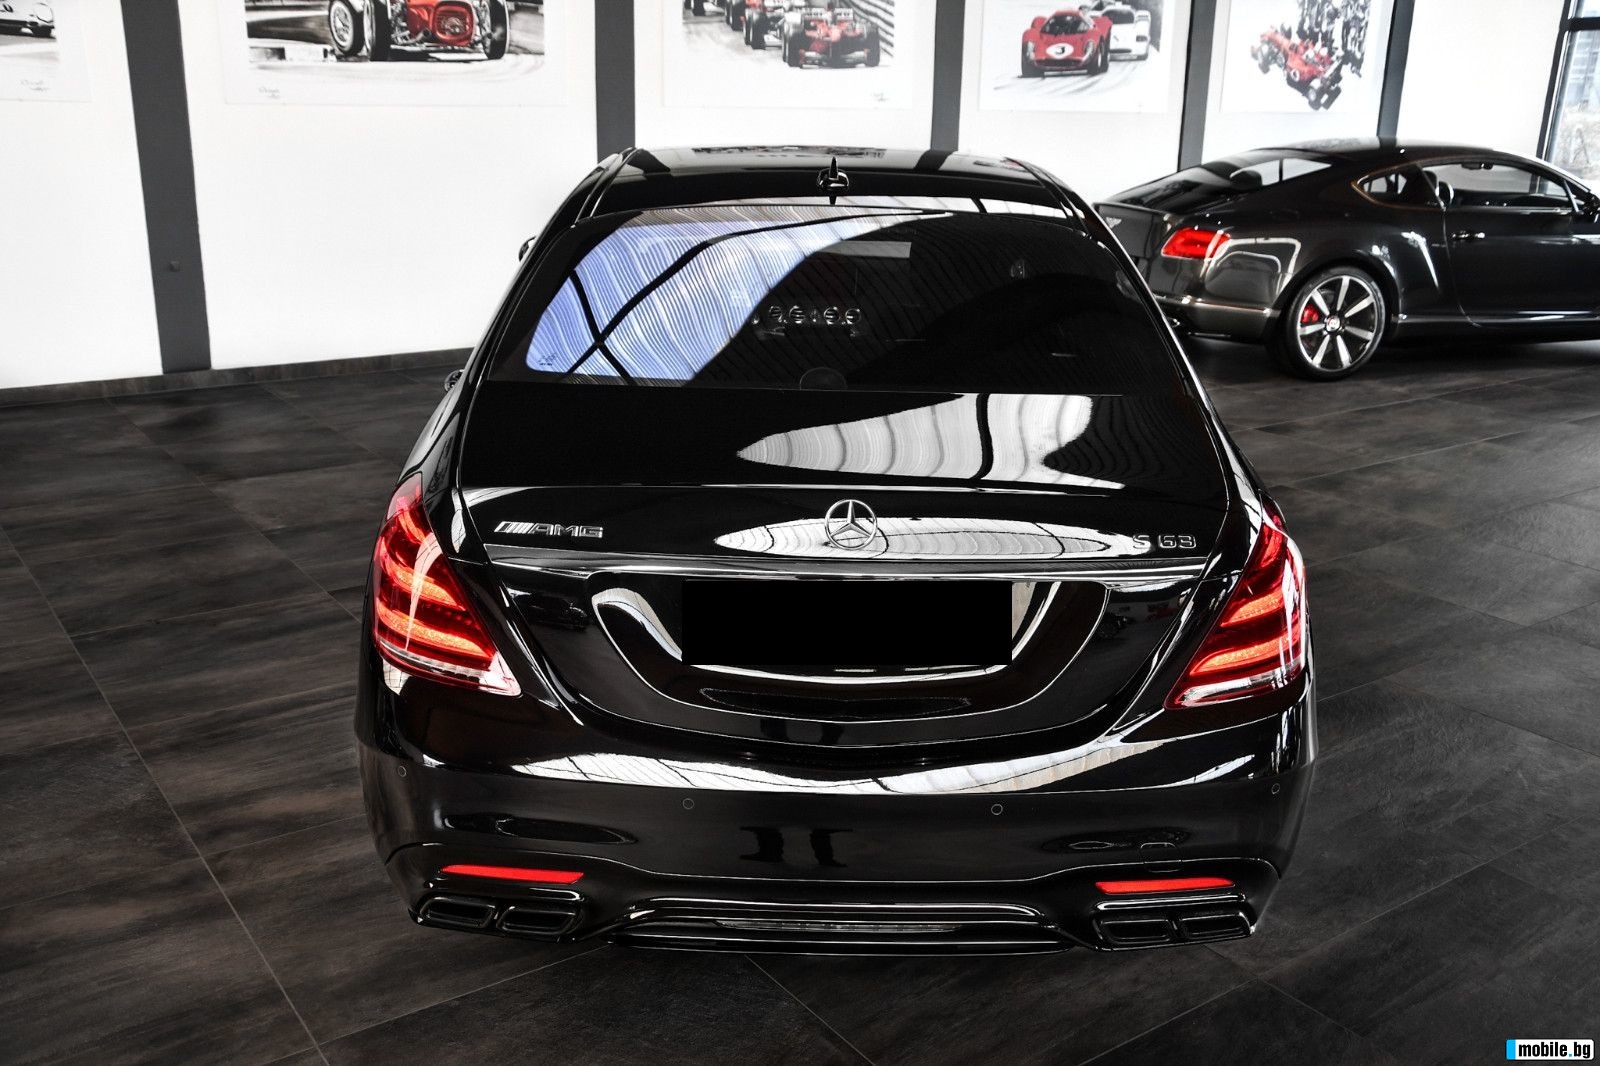 Mercedes-Benz S 63 AMG 4M+*LONG*EXCLUSIVE*PANO*NIGHT* | Mobile.bg   7